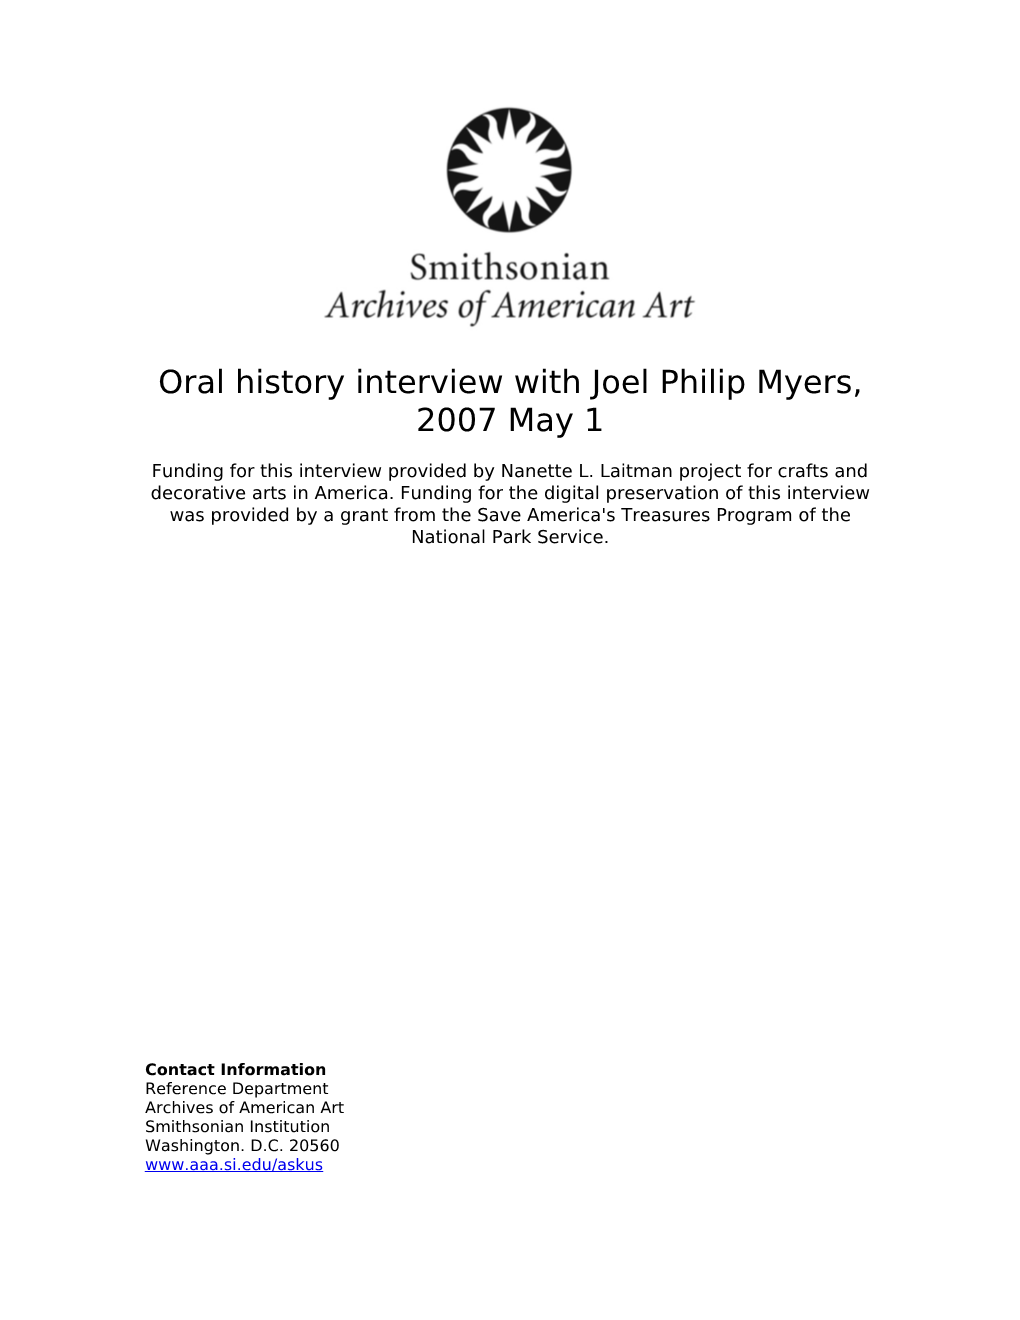 Oral History Interview with Joel Philip Myers, 2007 May 1